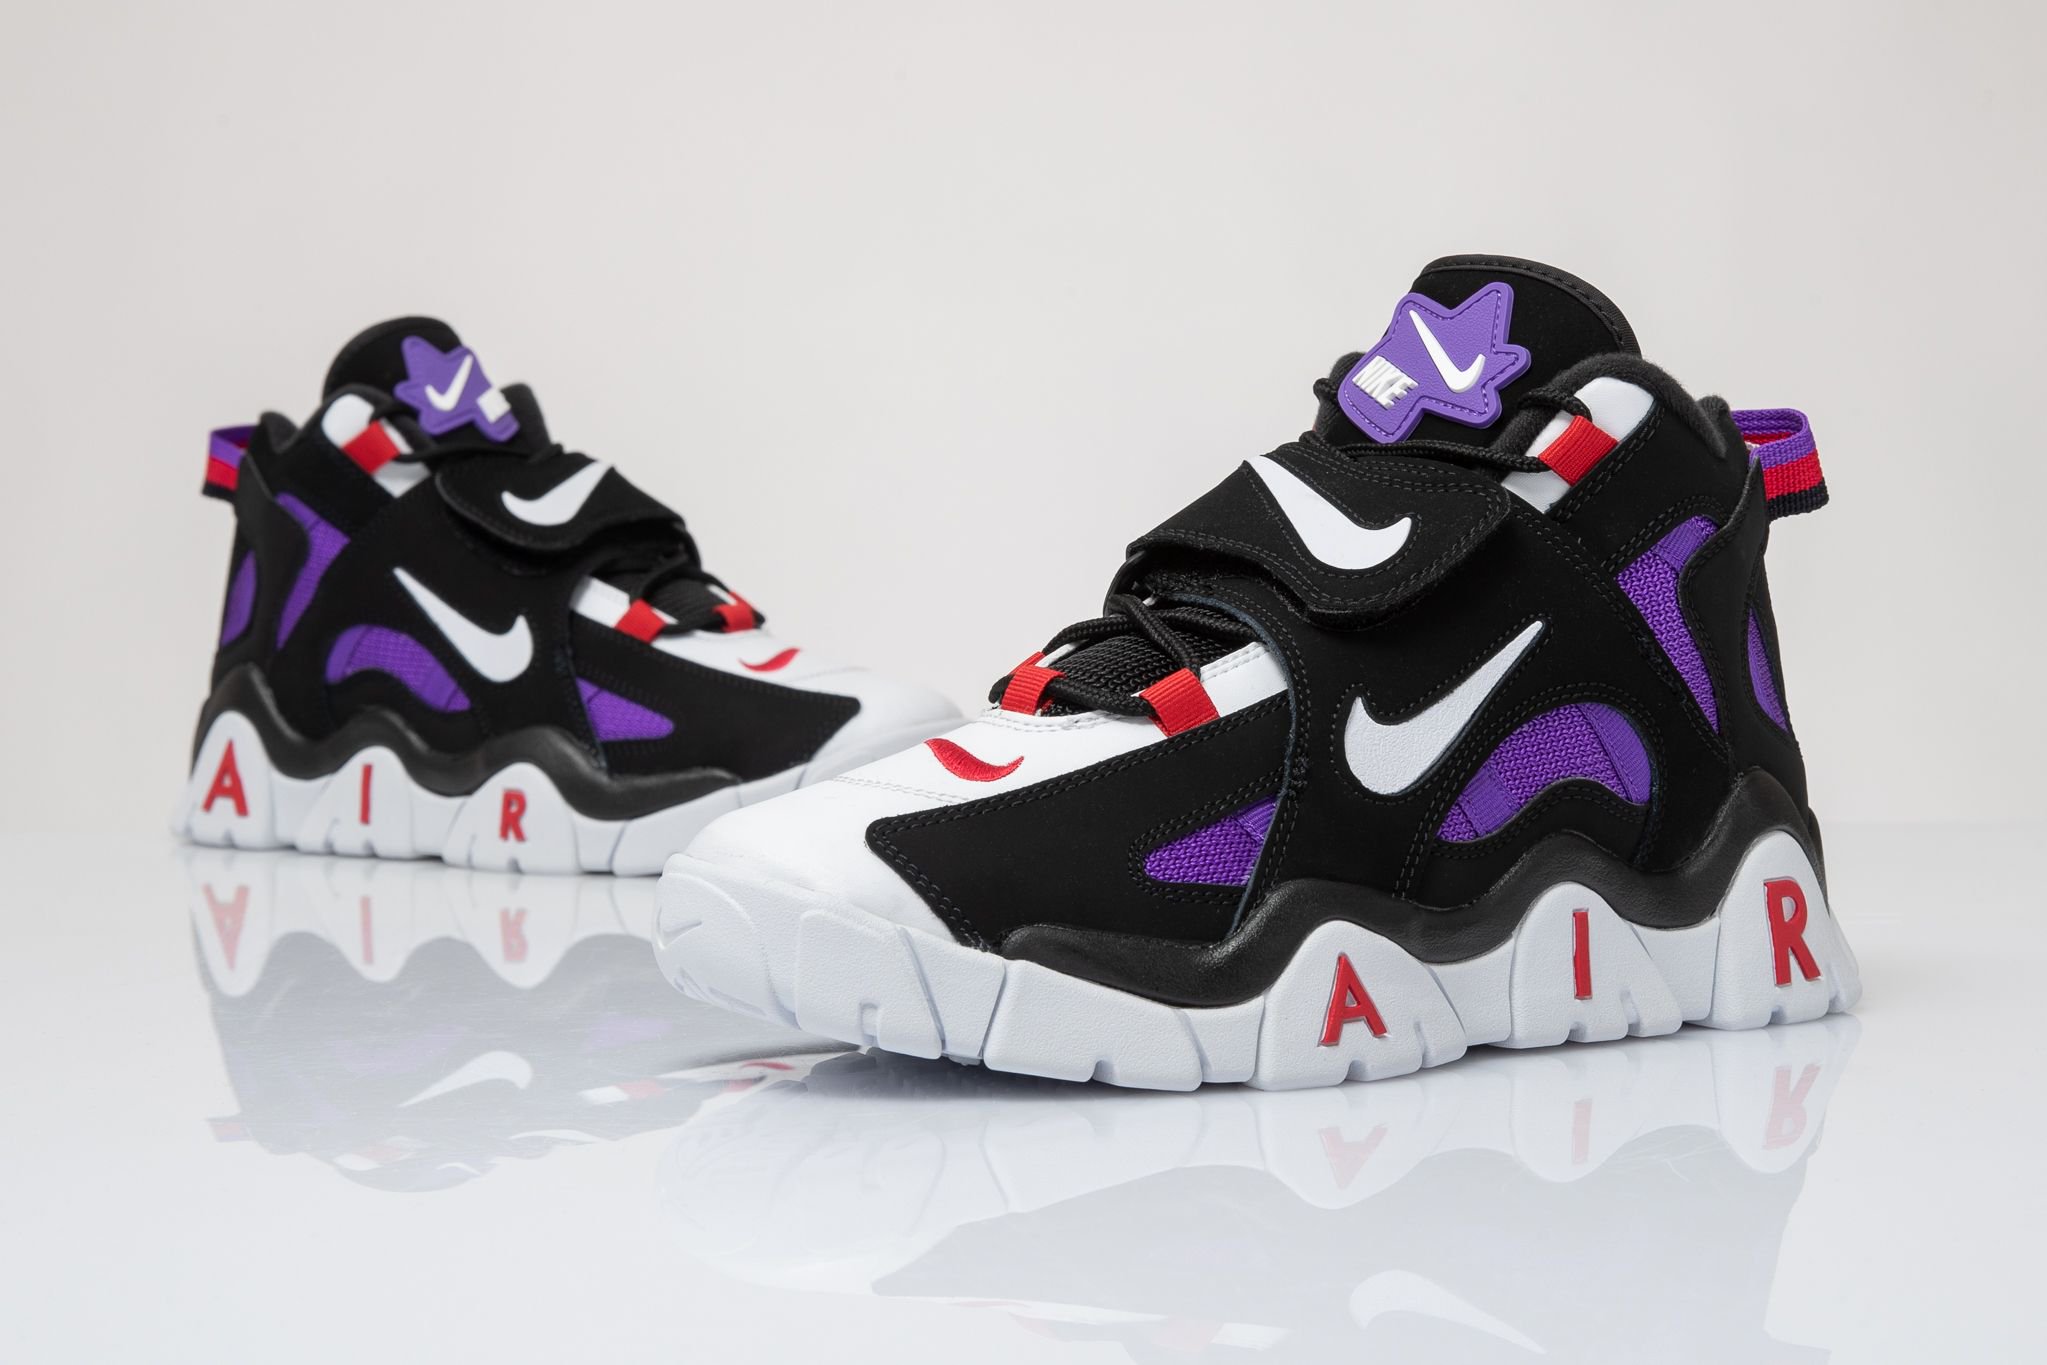 Titolo on Twitter: "OUT NOW 🔥 Nike Air Barrage Mid "Black/White-Hyper Grape-University Red" available online at https://t.co/GHTMjj2KeY L I N ➡️ https://t.co/bOadrGd8AK sizerun 🏃🏻 US 7 (40) - US 13 (47.5)